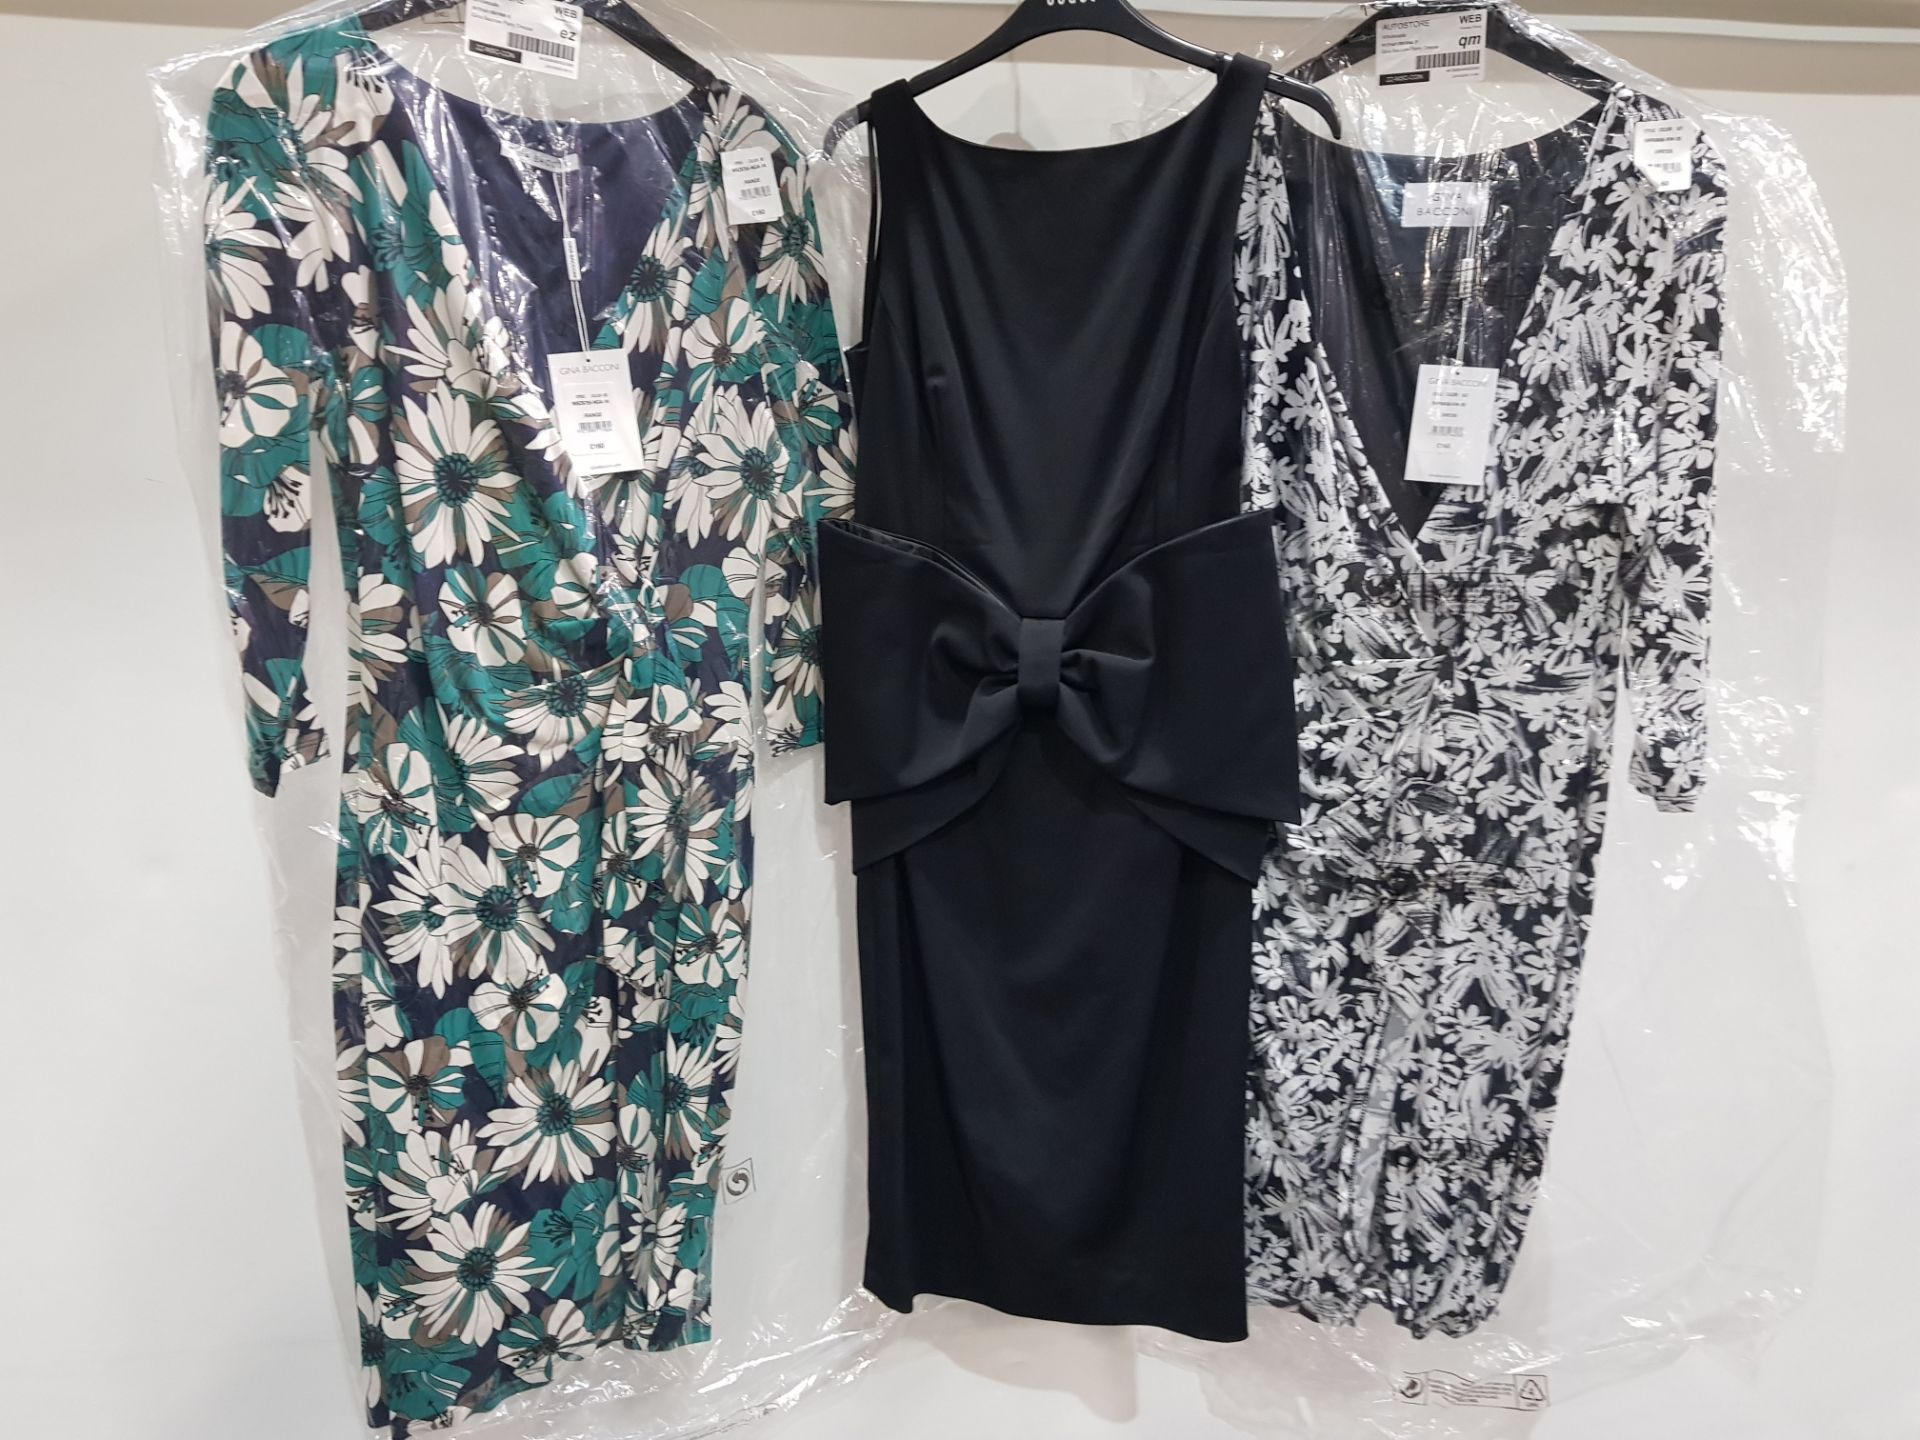 6 X BRAND NEW MIXED CLOTHING LOT CONTAINING GINA BACCONI FLORAL PRINT DRESSES SIZE UK 14 £160 -